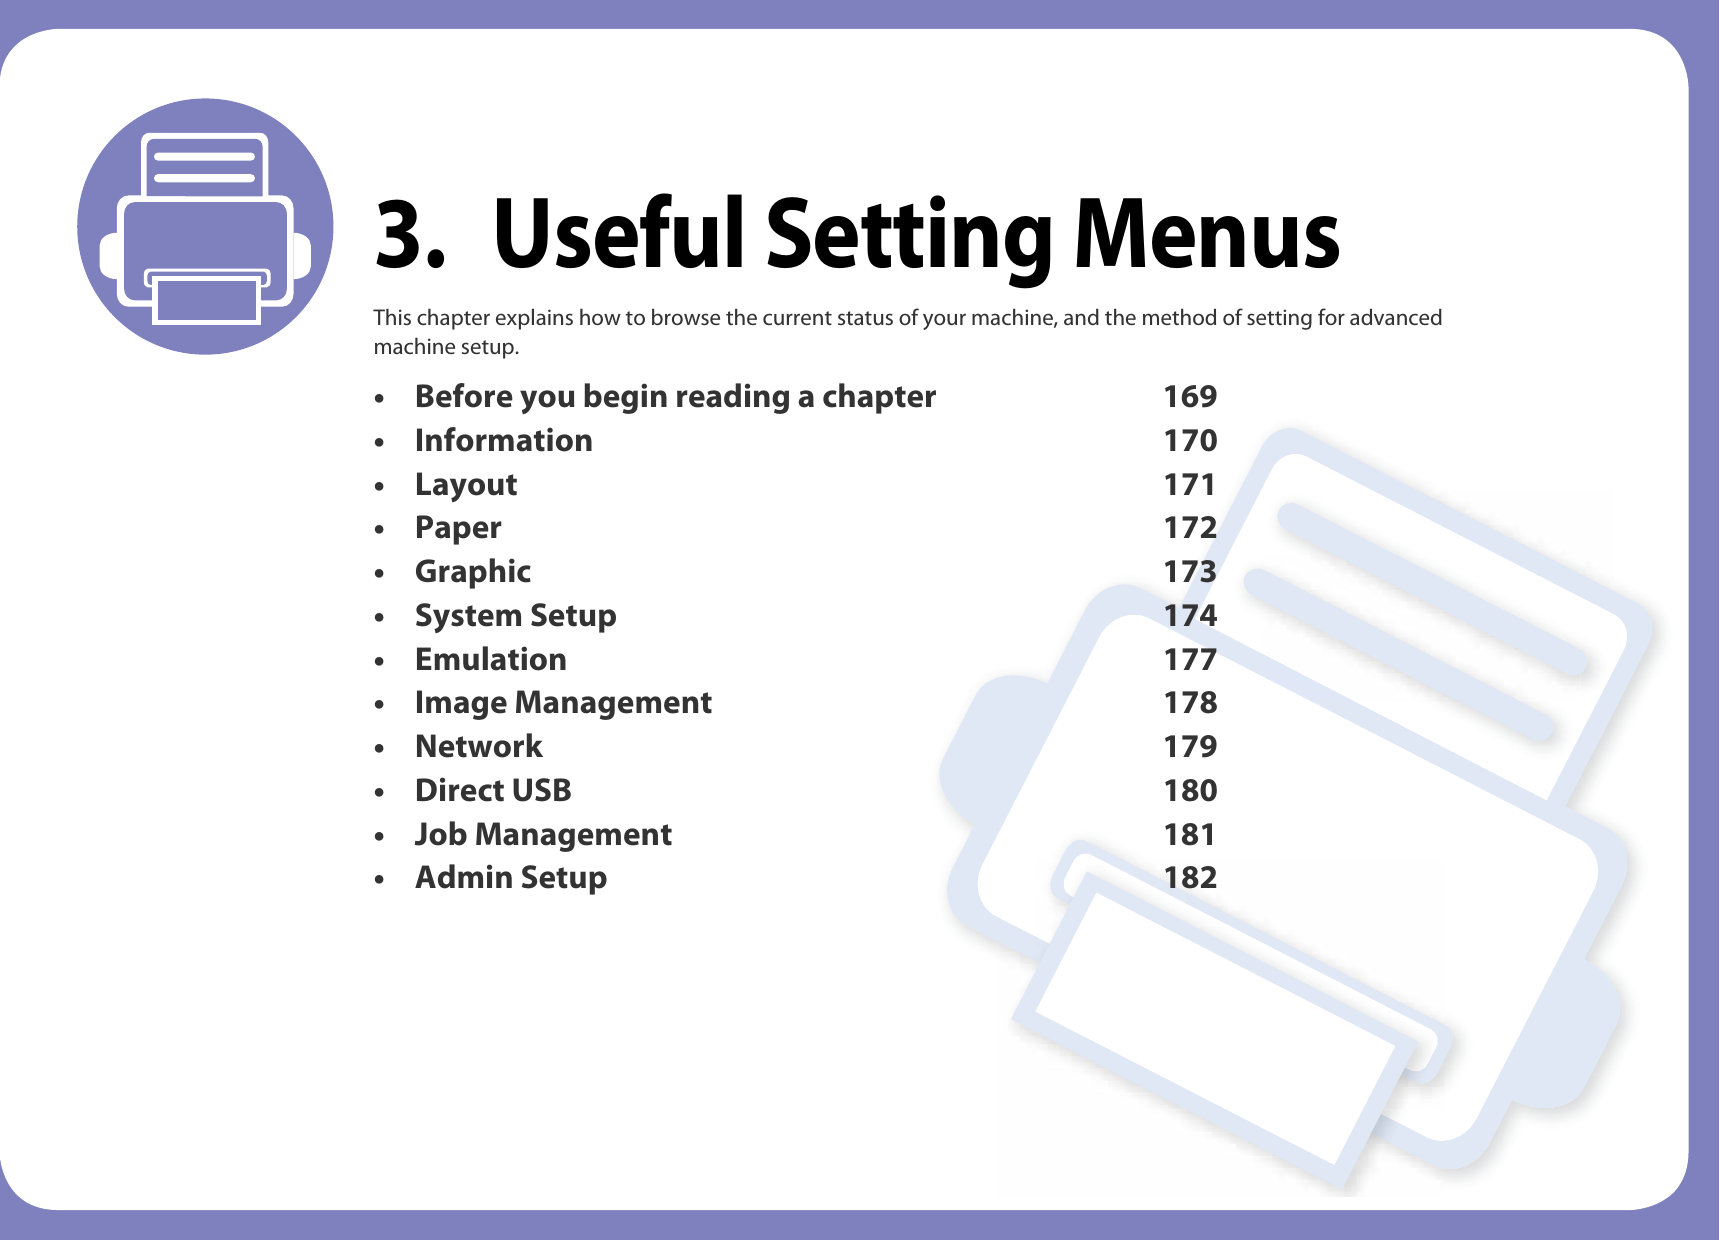 3. Useful Setting MenusThis chapter explains how to browse the current status of your machine, and the method of setting for advanced machine setup.• Before you begin reading a chapter 169• Information 170 • Layout 171 • Paper 172 • Graphic 173 • System Setup 174 • Emulation 177 • Image Management 178 • Network 179 • Direct USB 180 • Job Management 181 • Admin Setup 182 